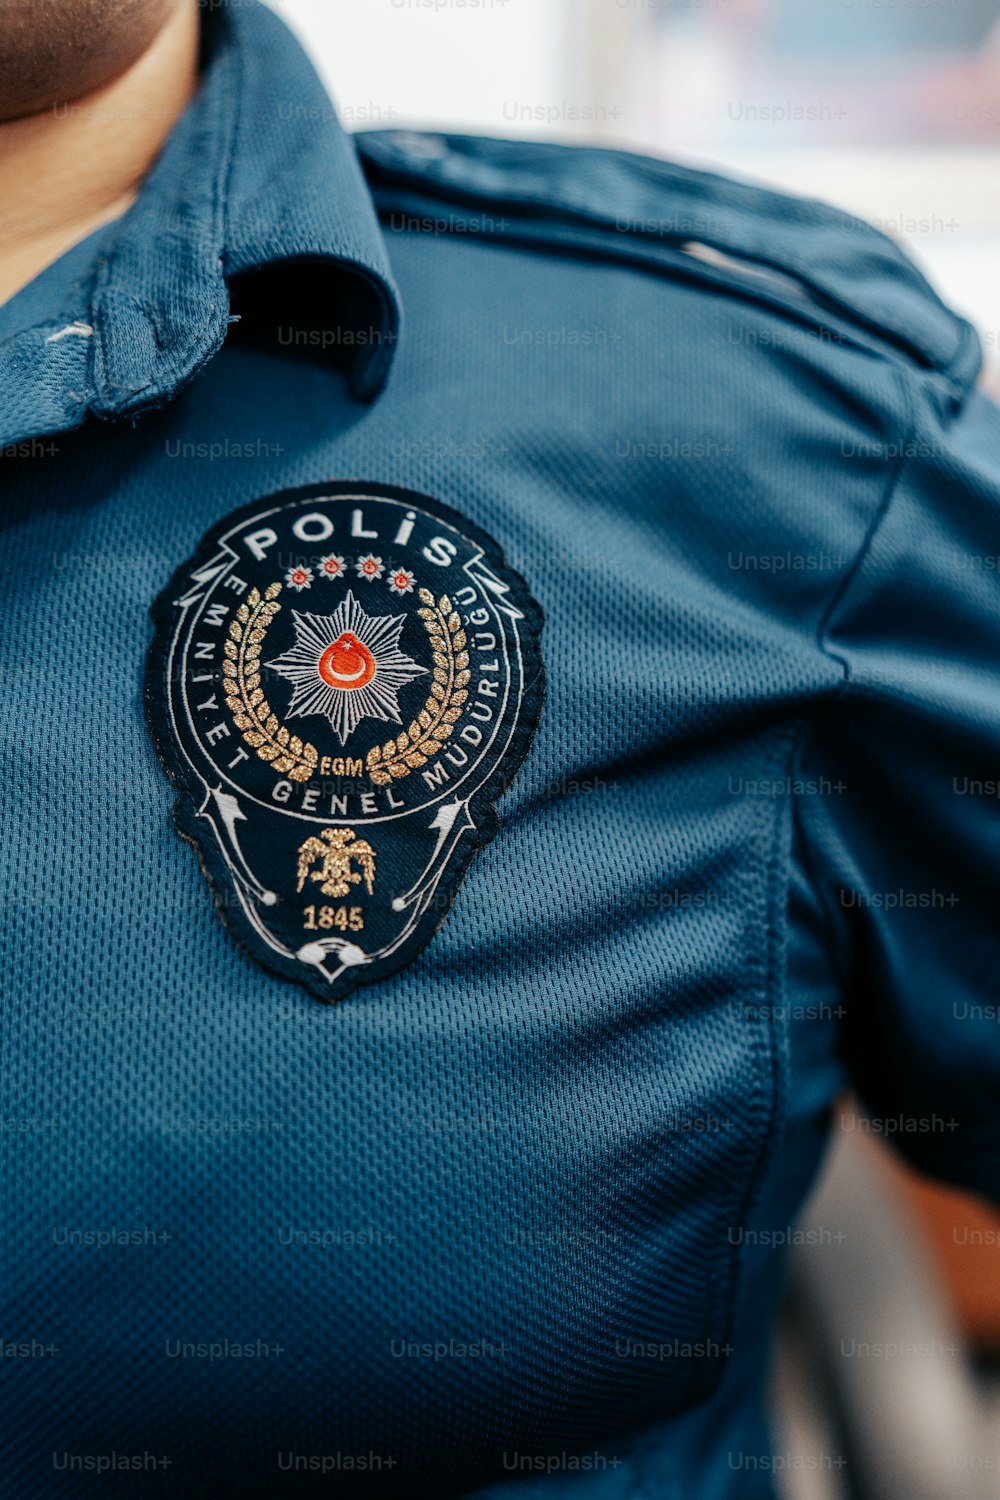 a police officer is wearing a blue uniform